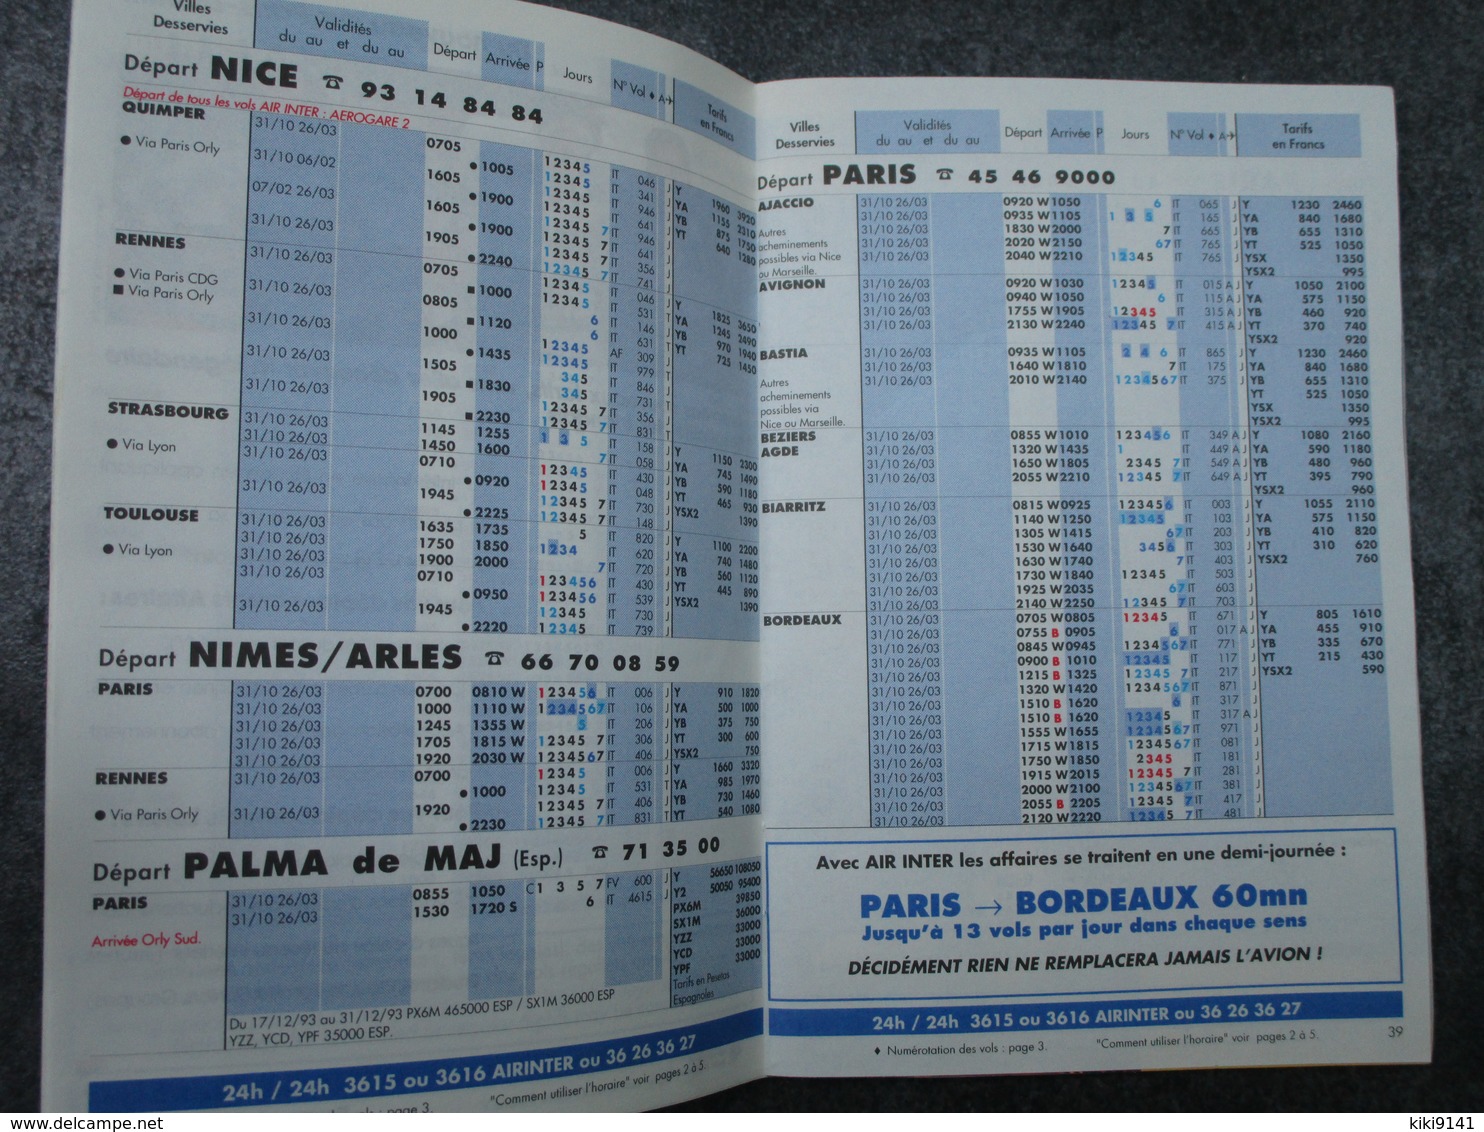 AIR INTER - Horaire N°68 - 88 Pages - Horarios